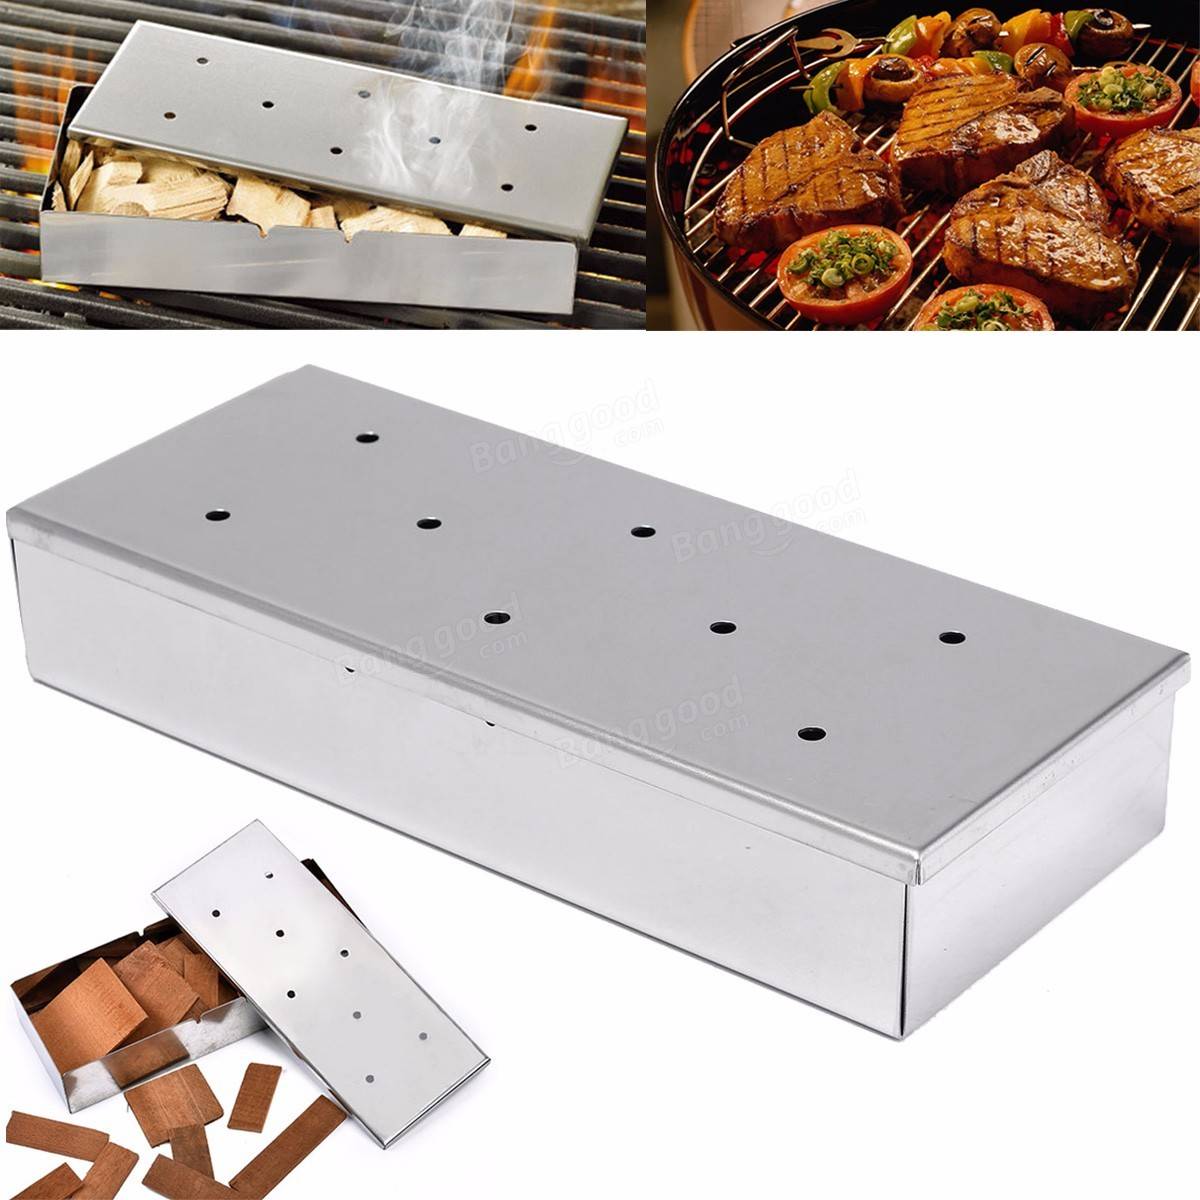 Stainless Steel BBQ Gas Grill Smoker Box Home Garden Outdooors Wood ...